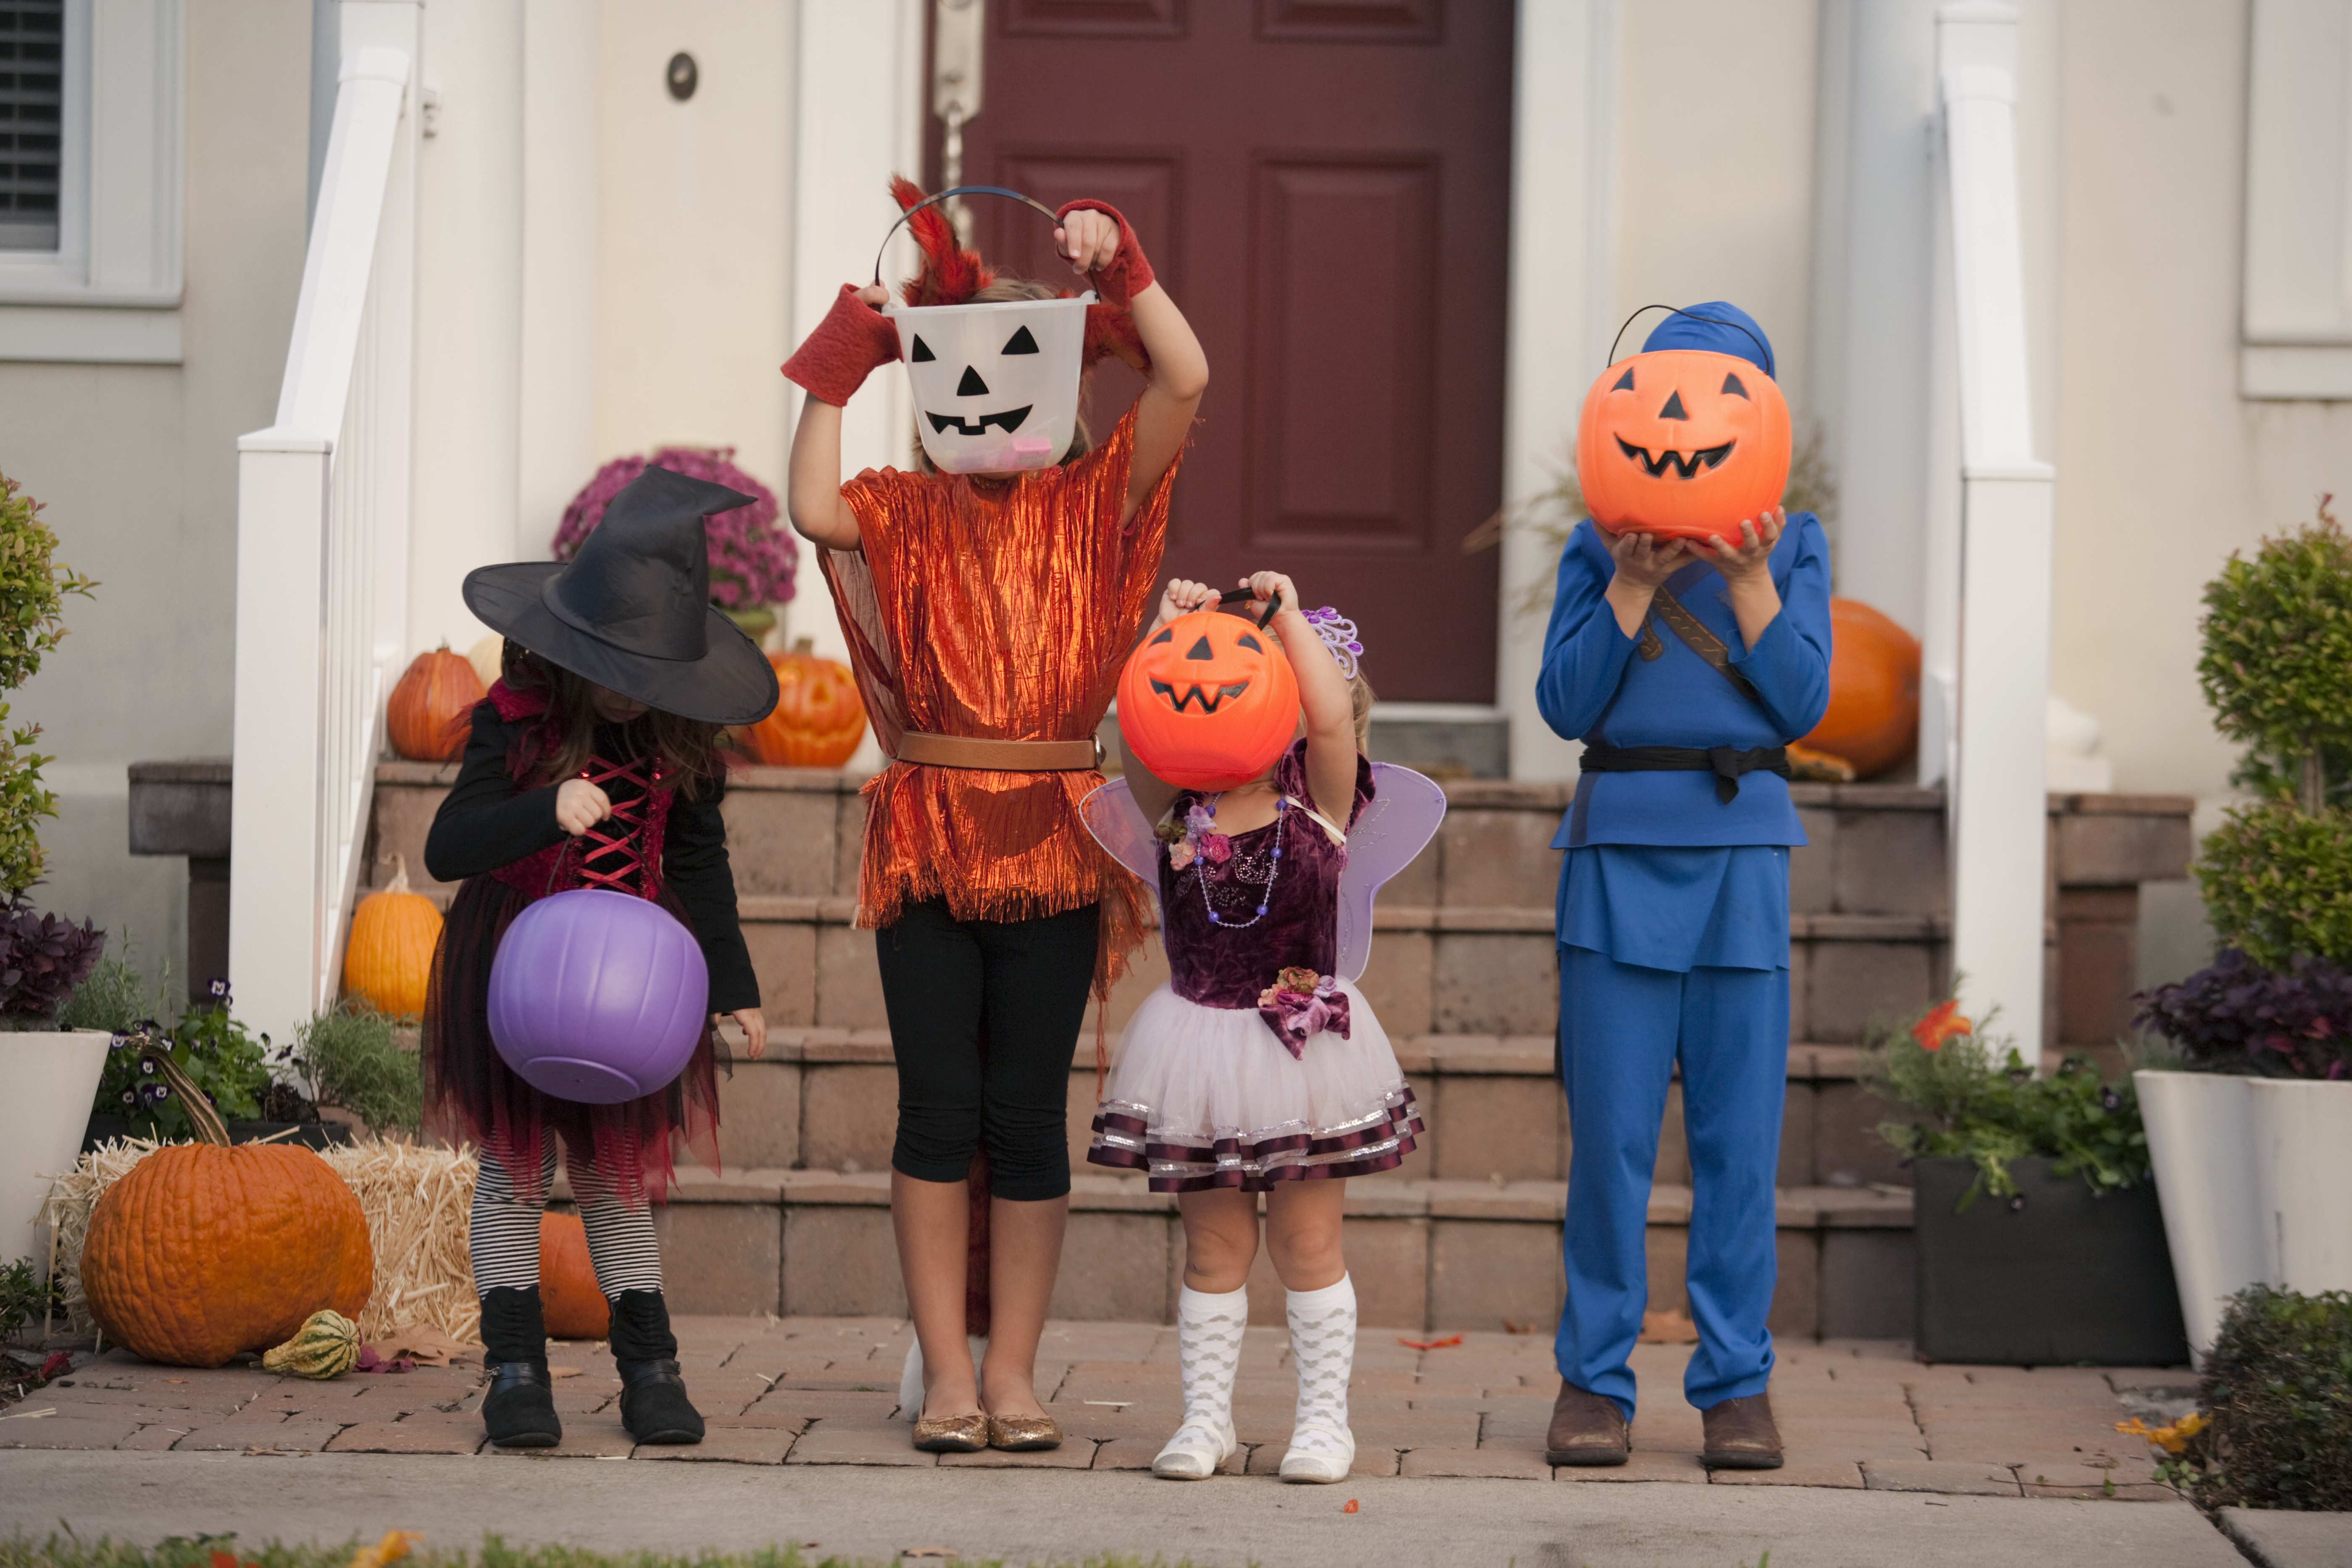 Target Made a Halloween App to Find the Best Houses for Trick or Treating